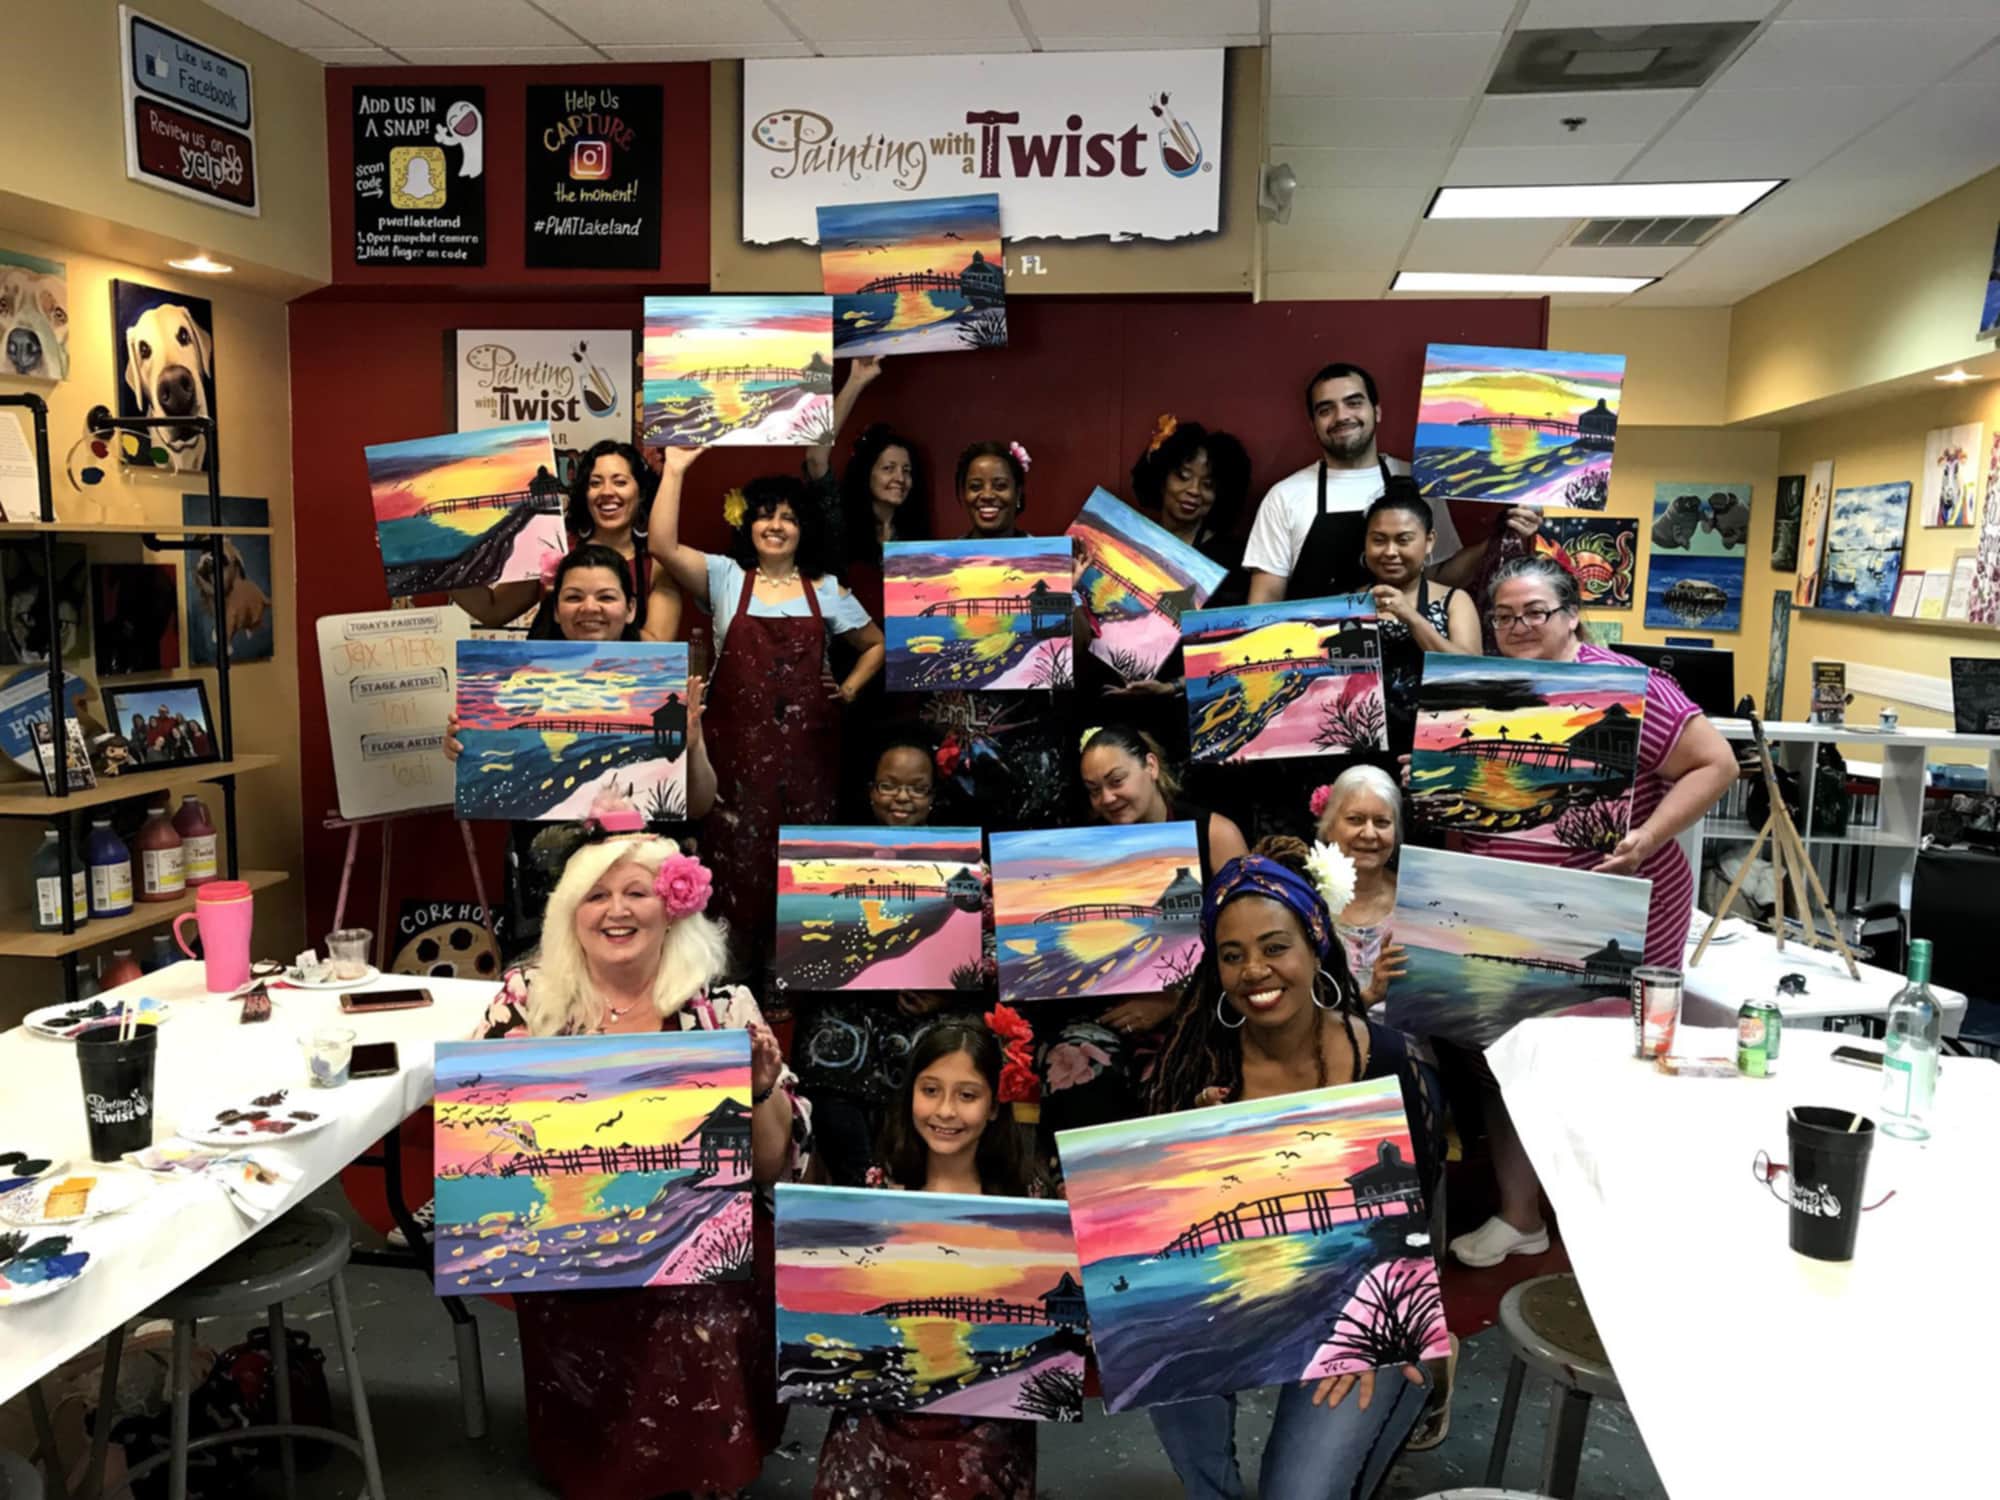 Group with finished paintings at Painting with a Twist in Lakeland, FL